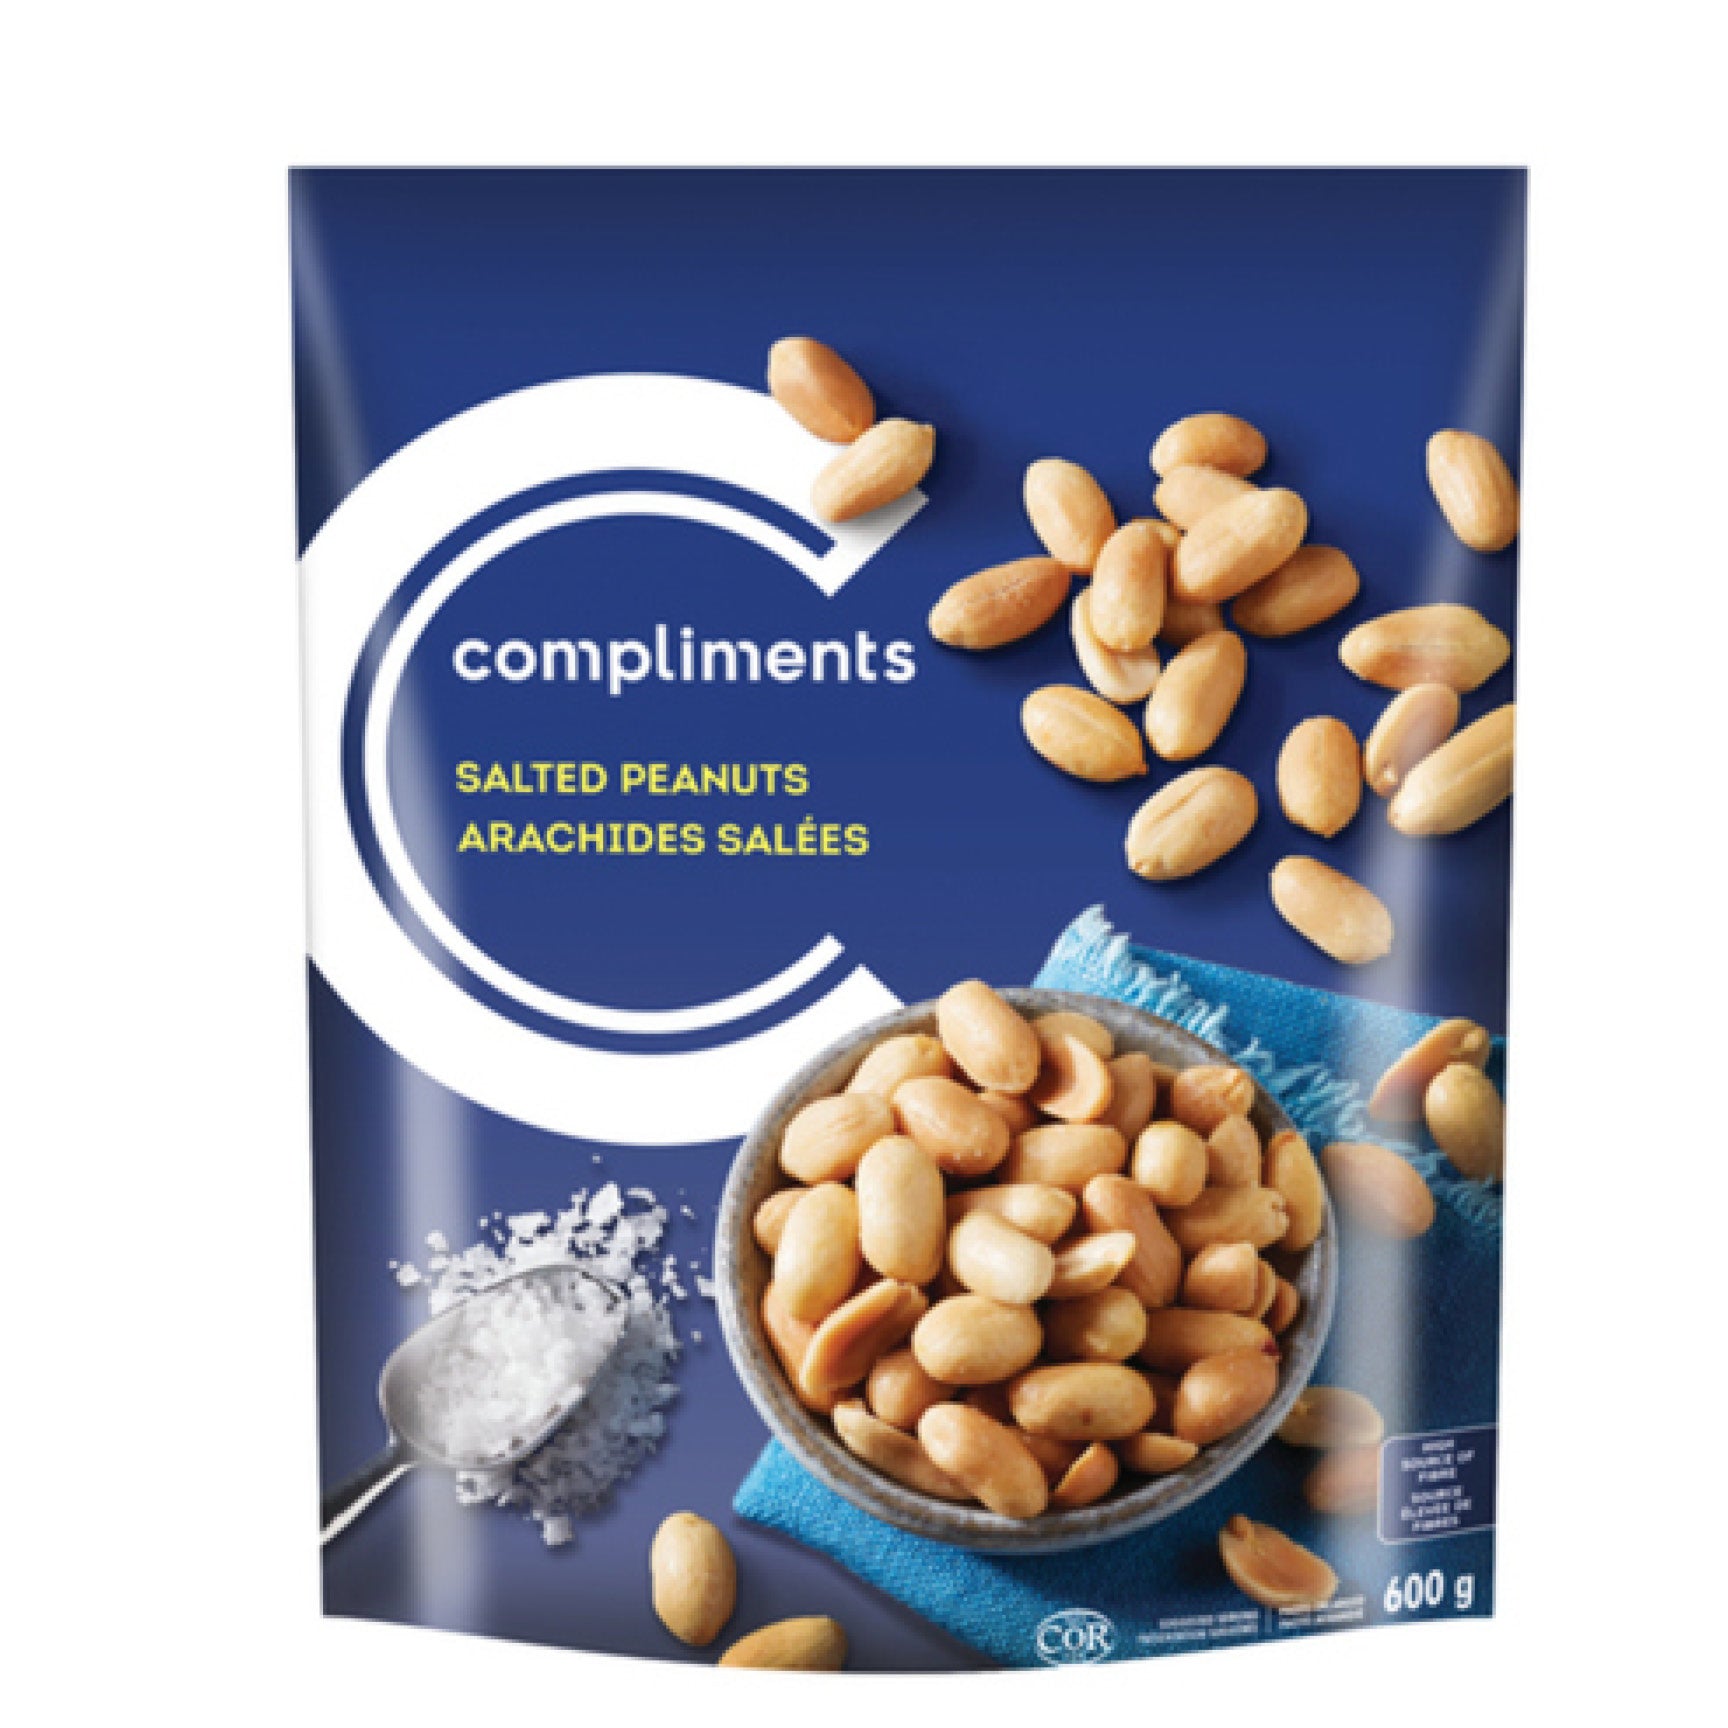 Compliments Roasted & Salted Peanuts, 600g